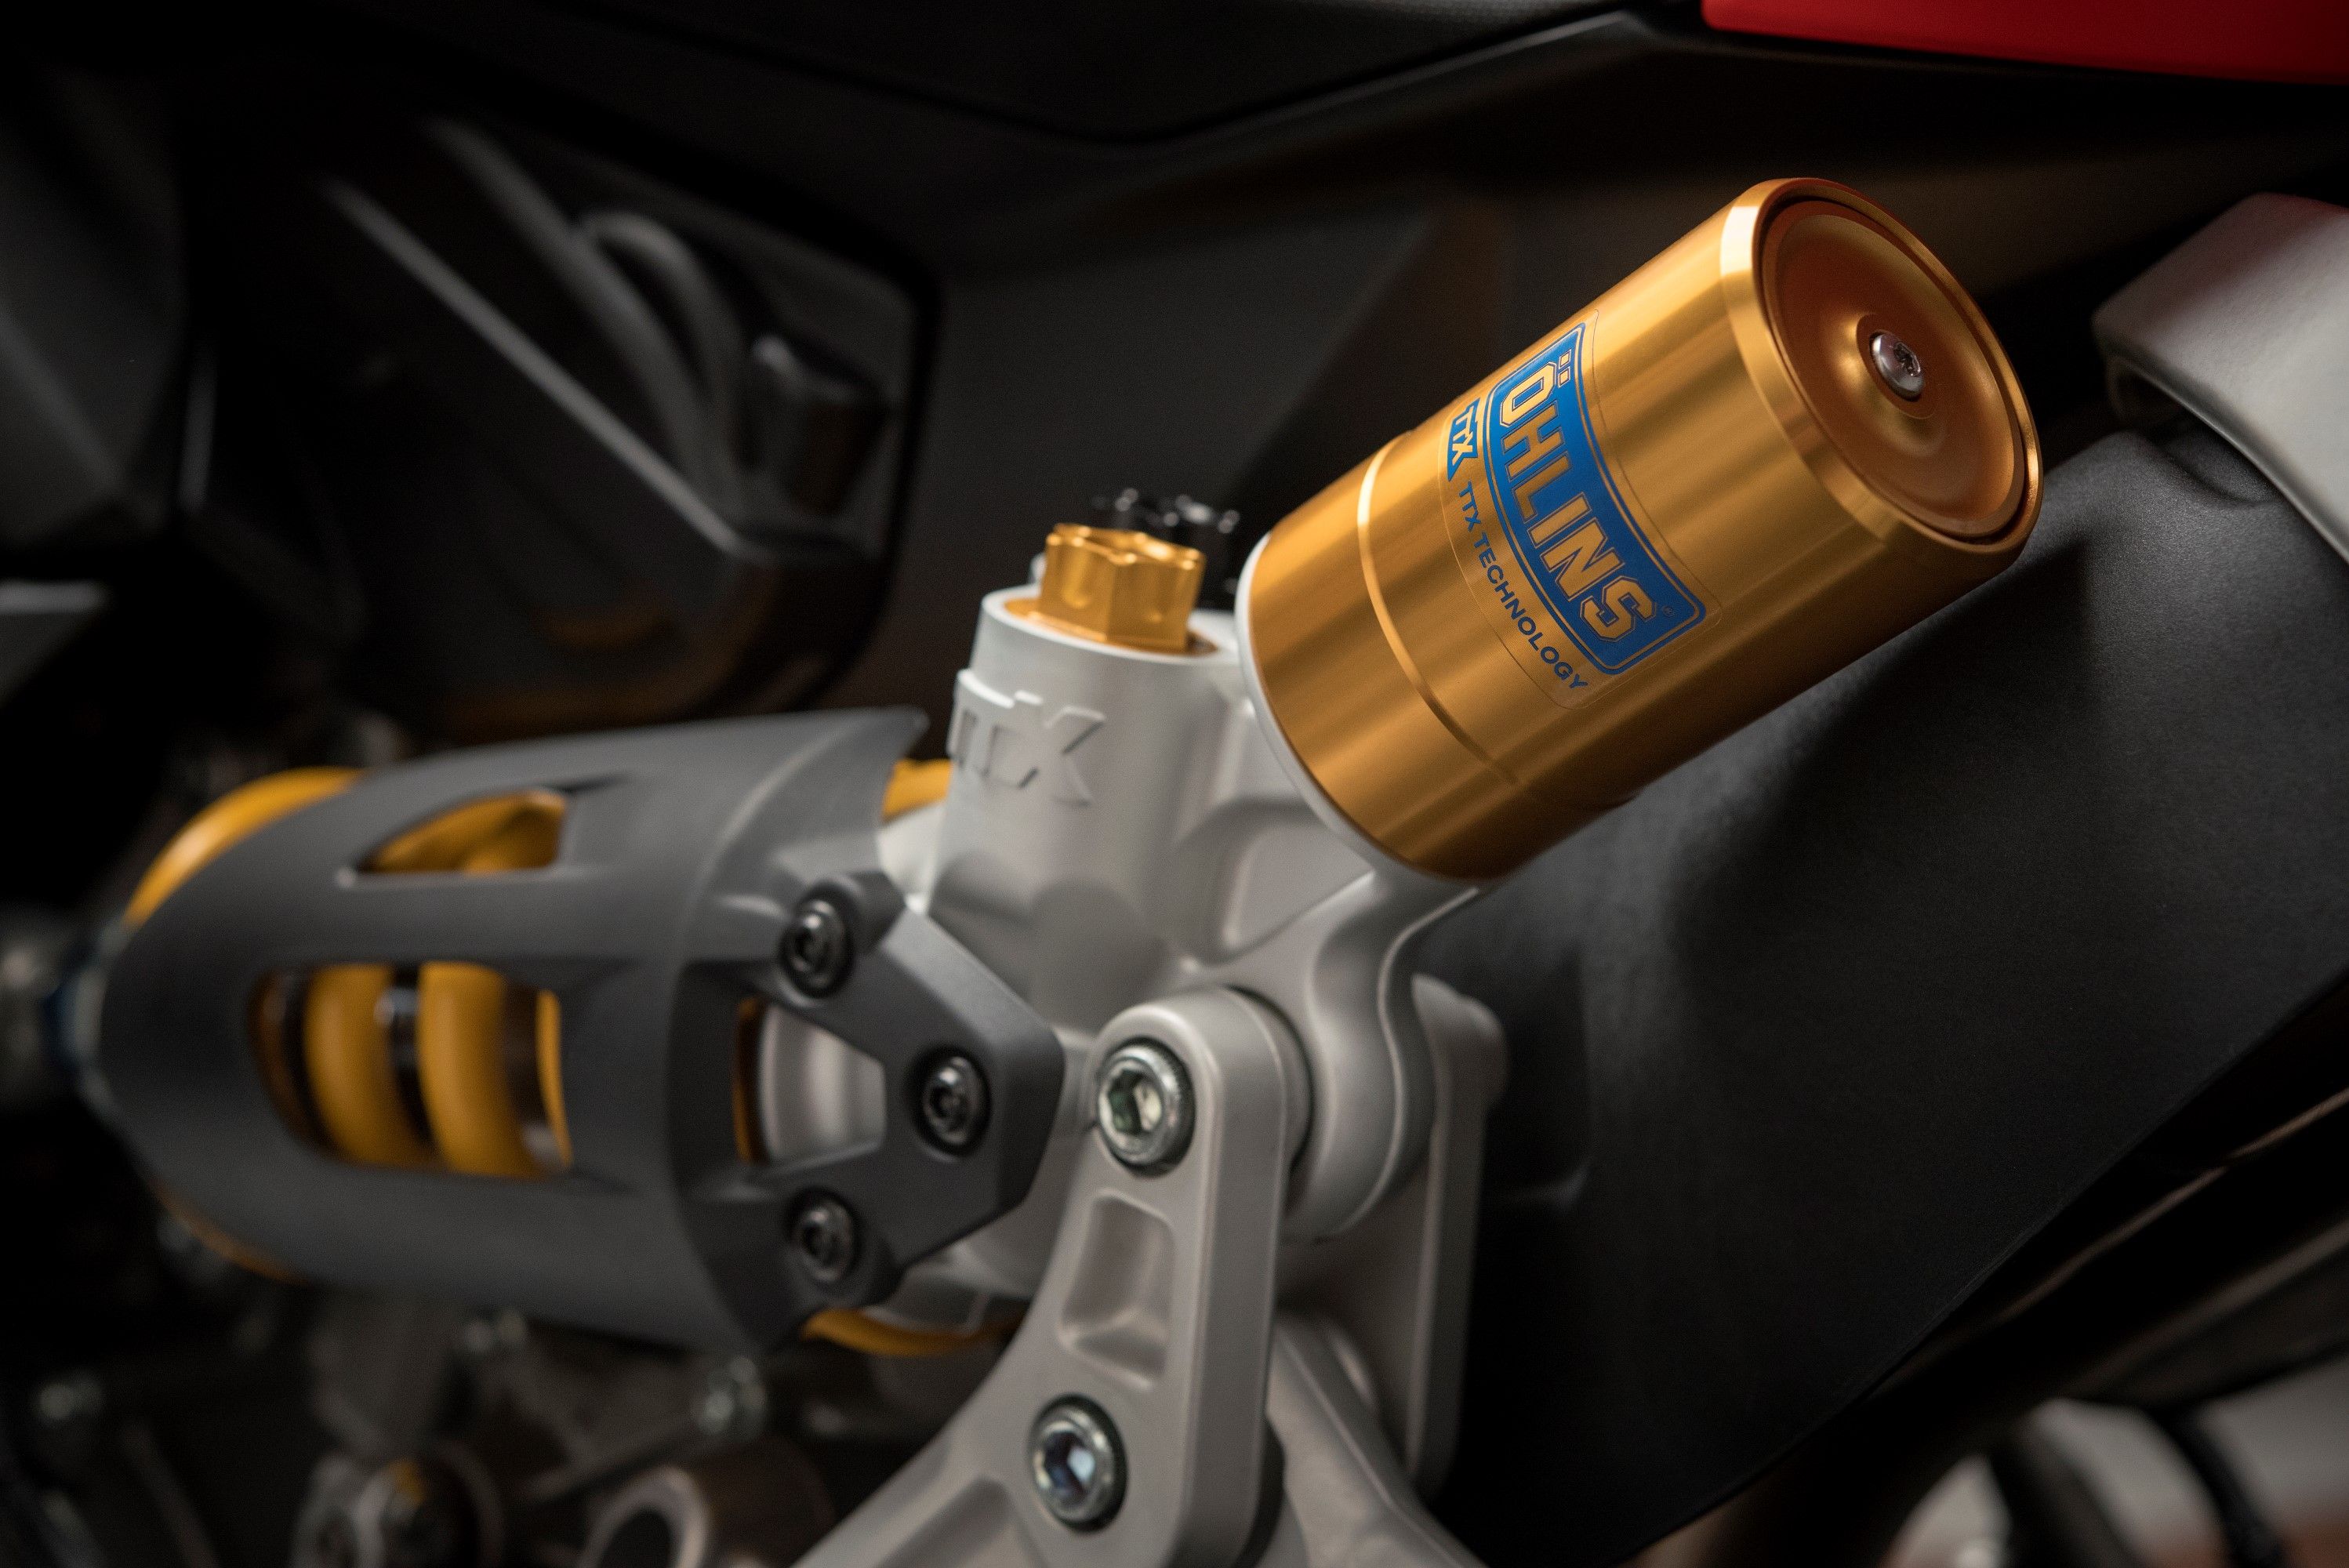  Ohlins TTX36 shock-absorber at the rear is state-of-the-art